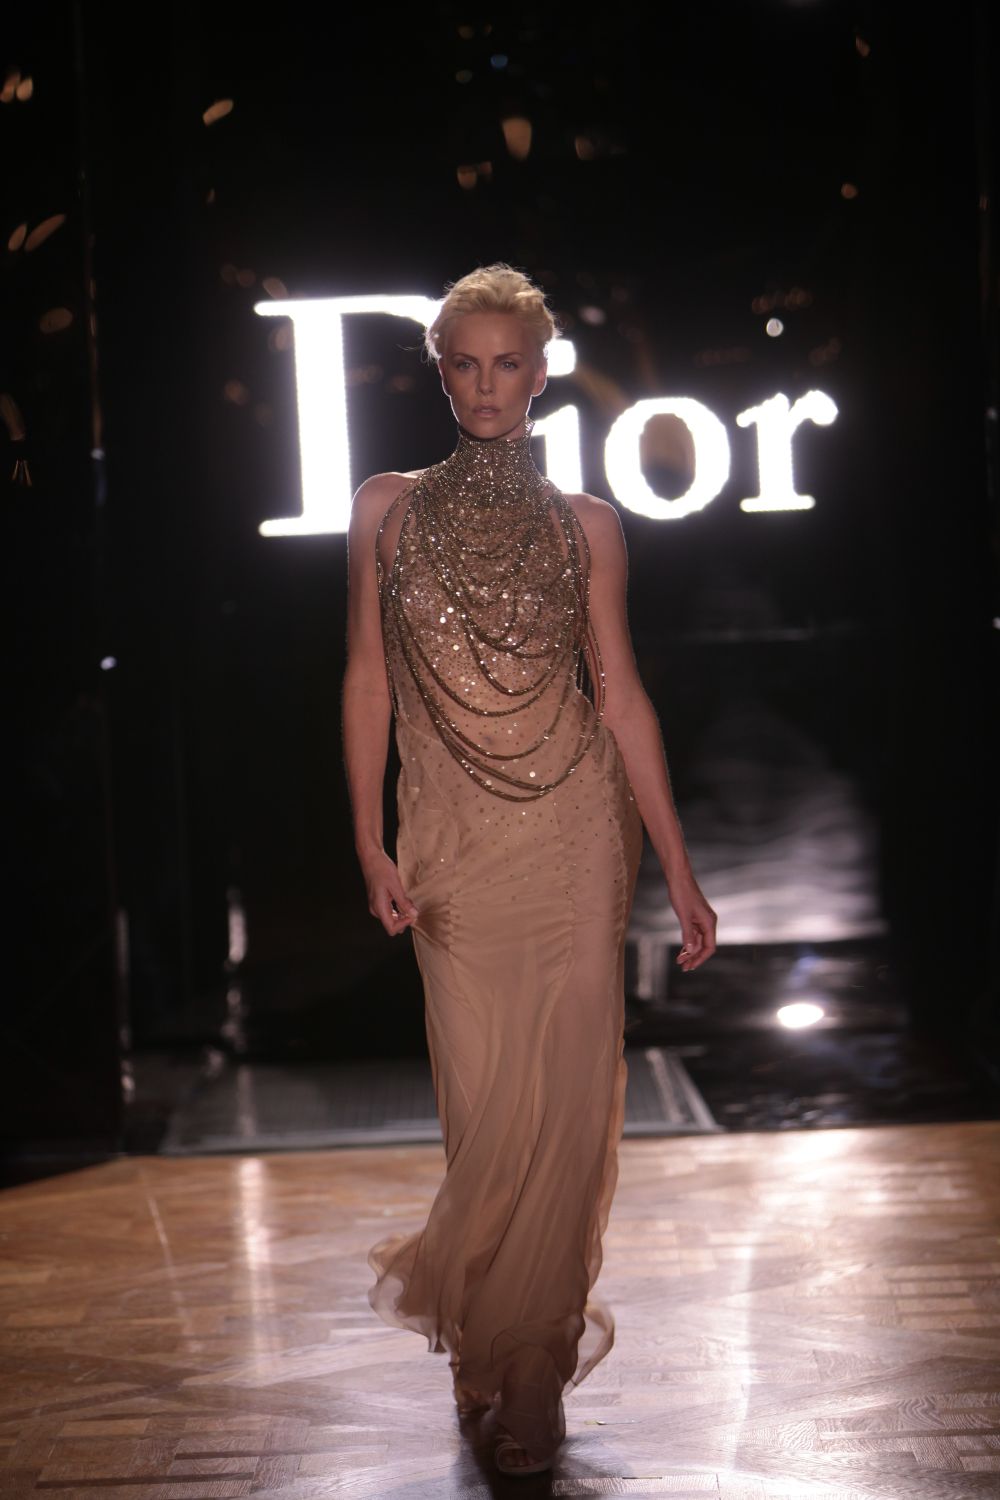 Magnificent Charlize Theron Starring In A New Campaign For J Adore By Dior Popsop